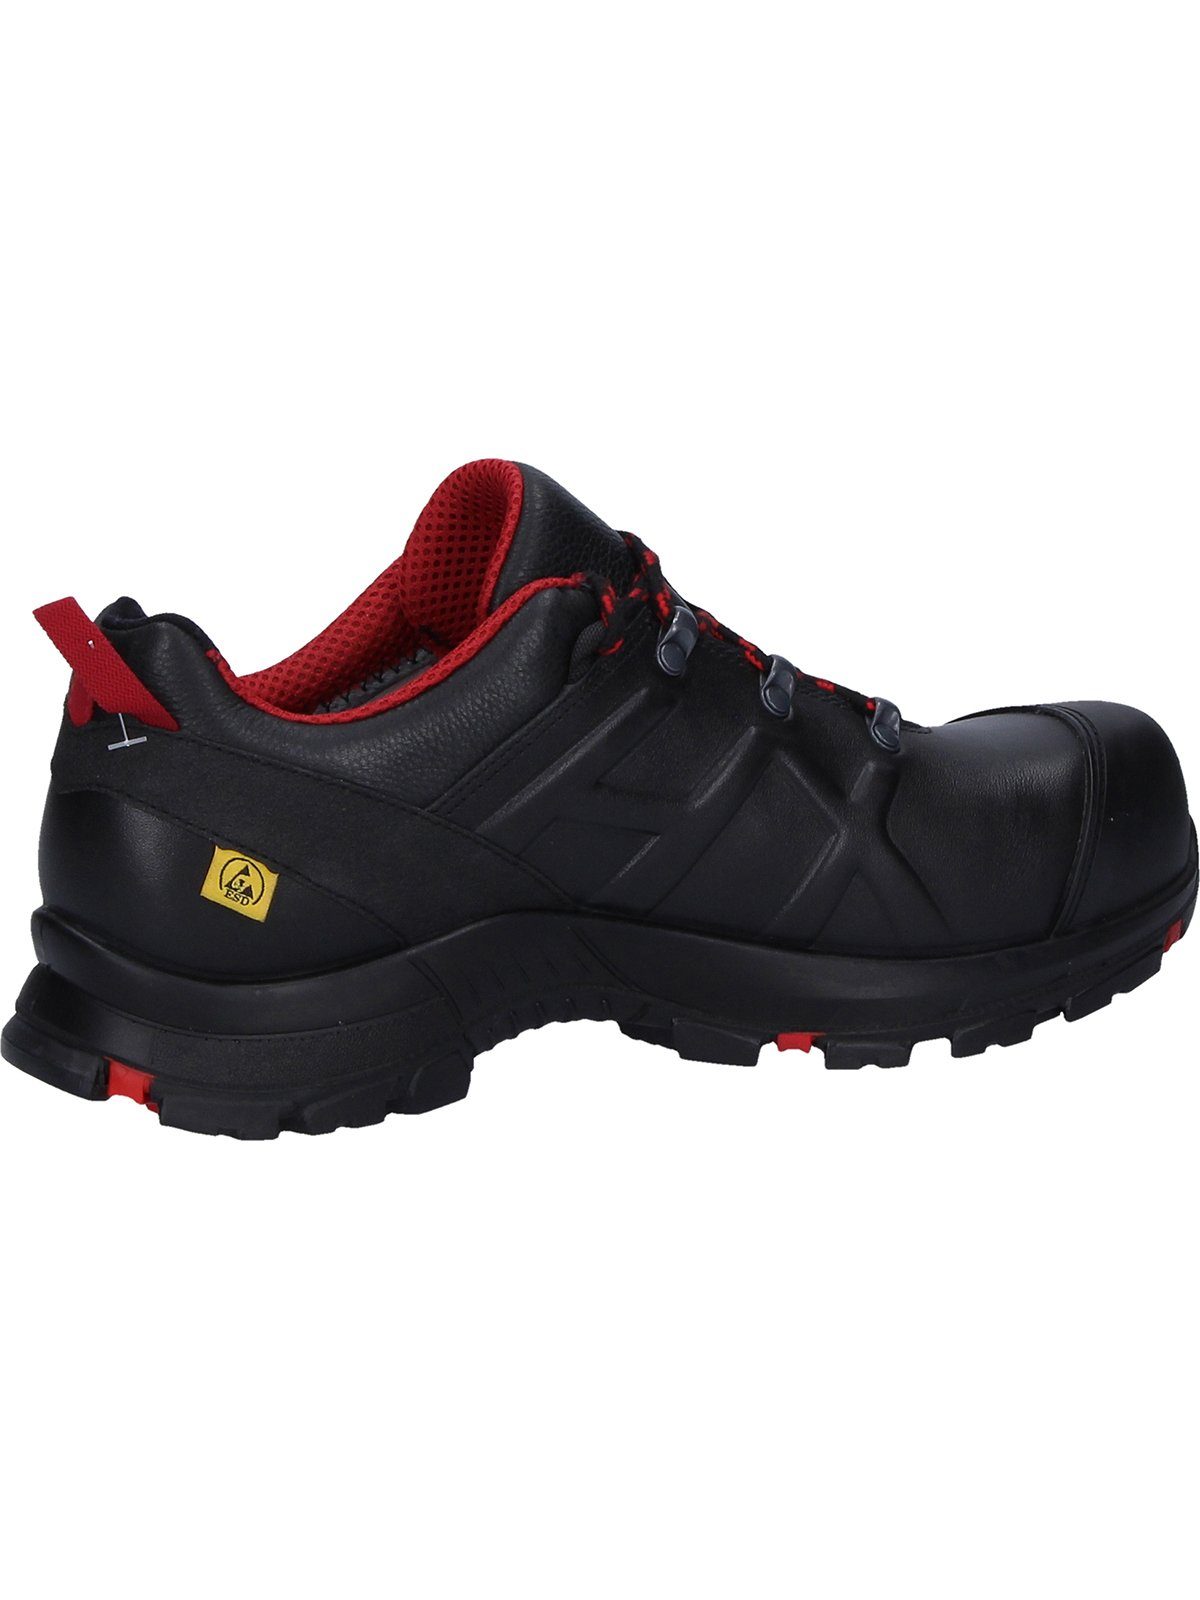 haix Arbeitsschuh black/red Black Safety Eagle low 54